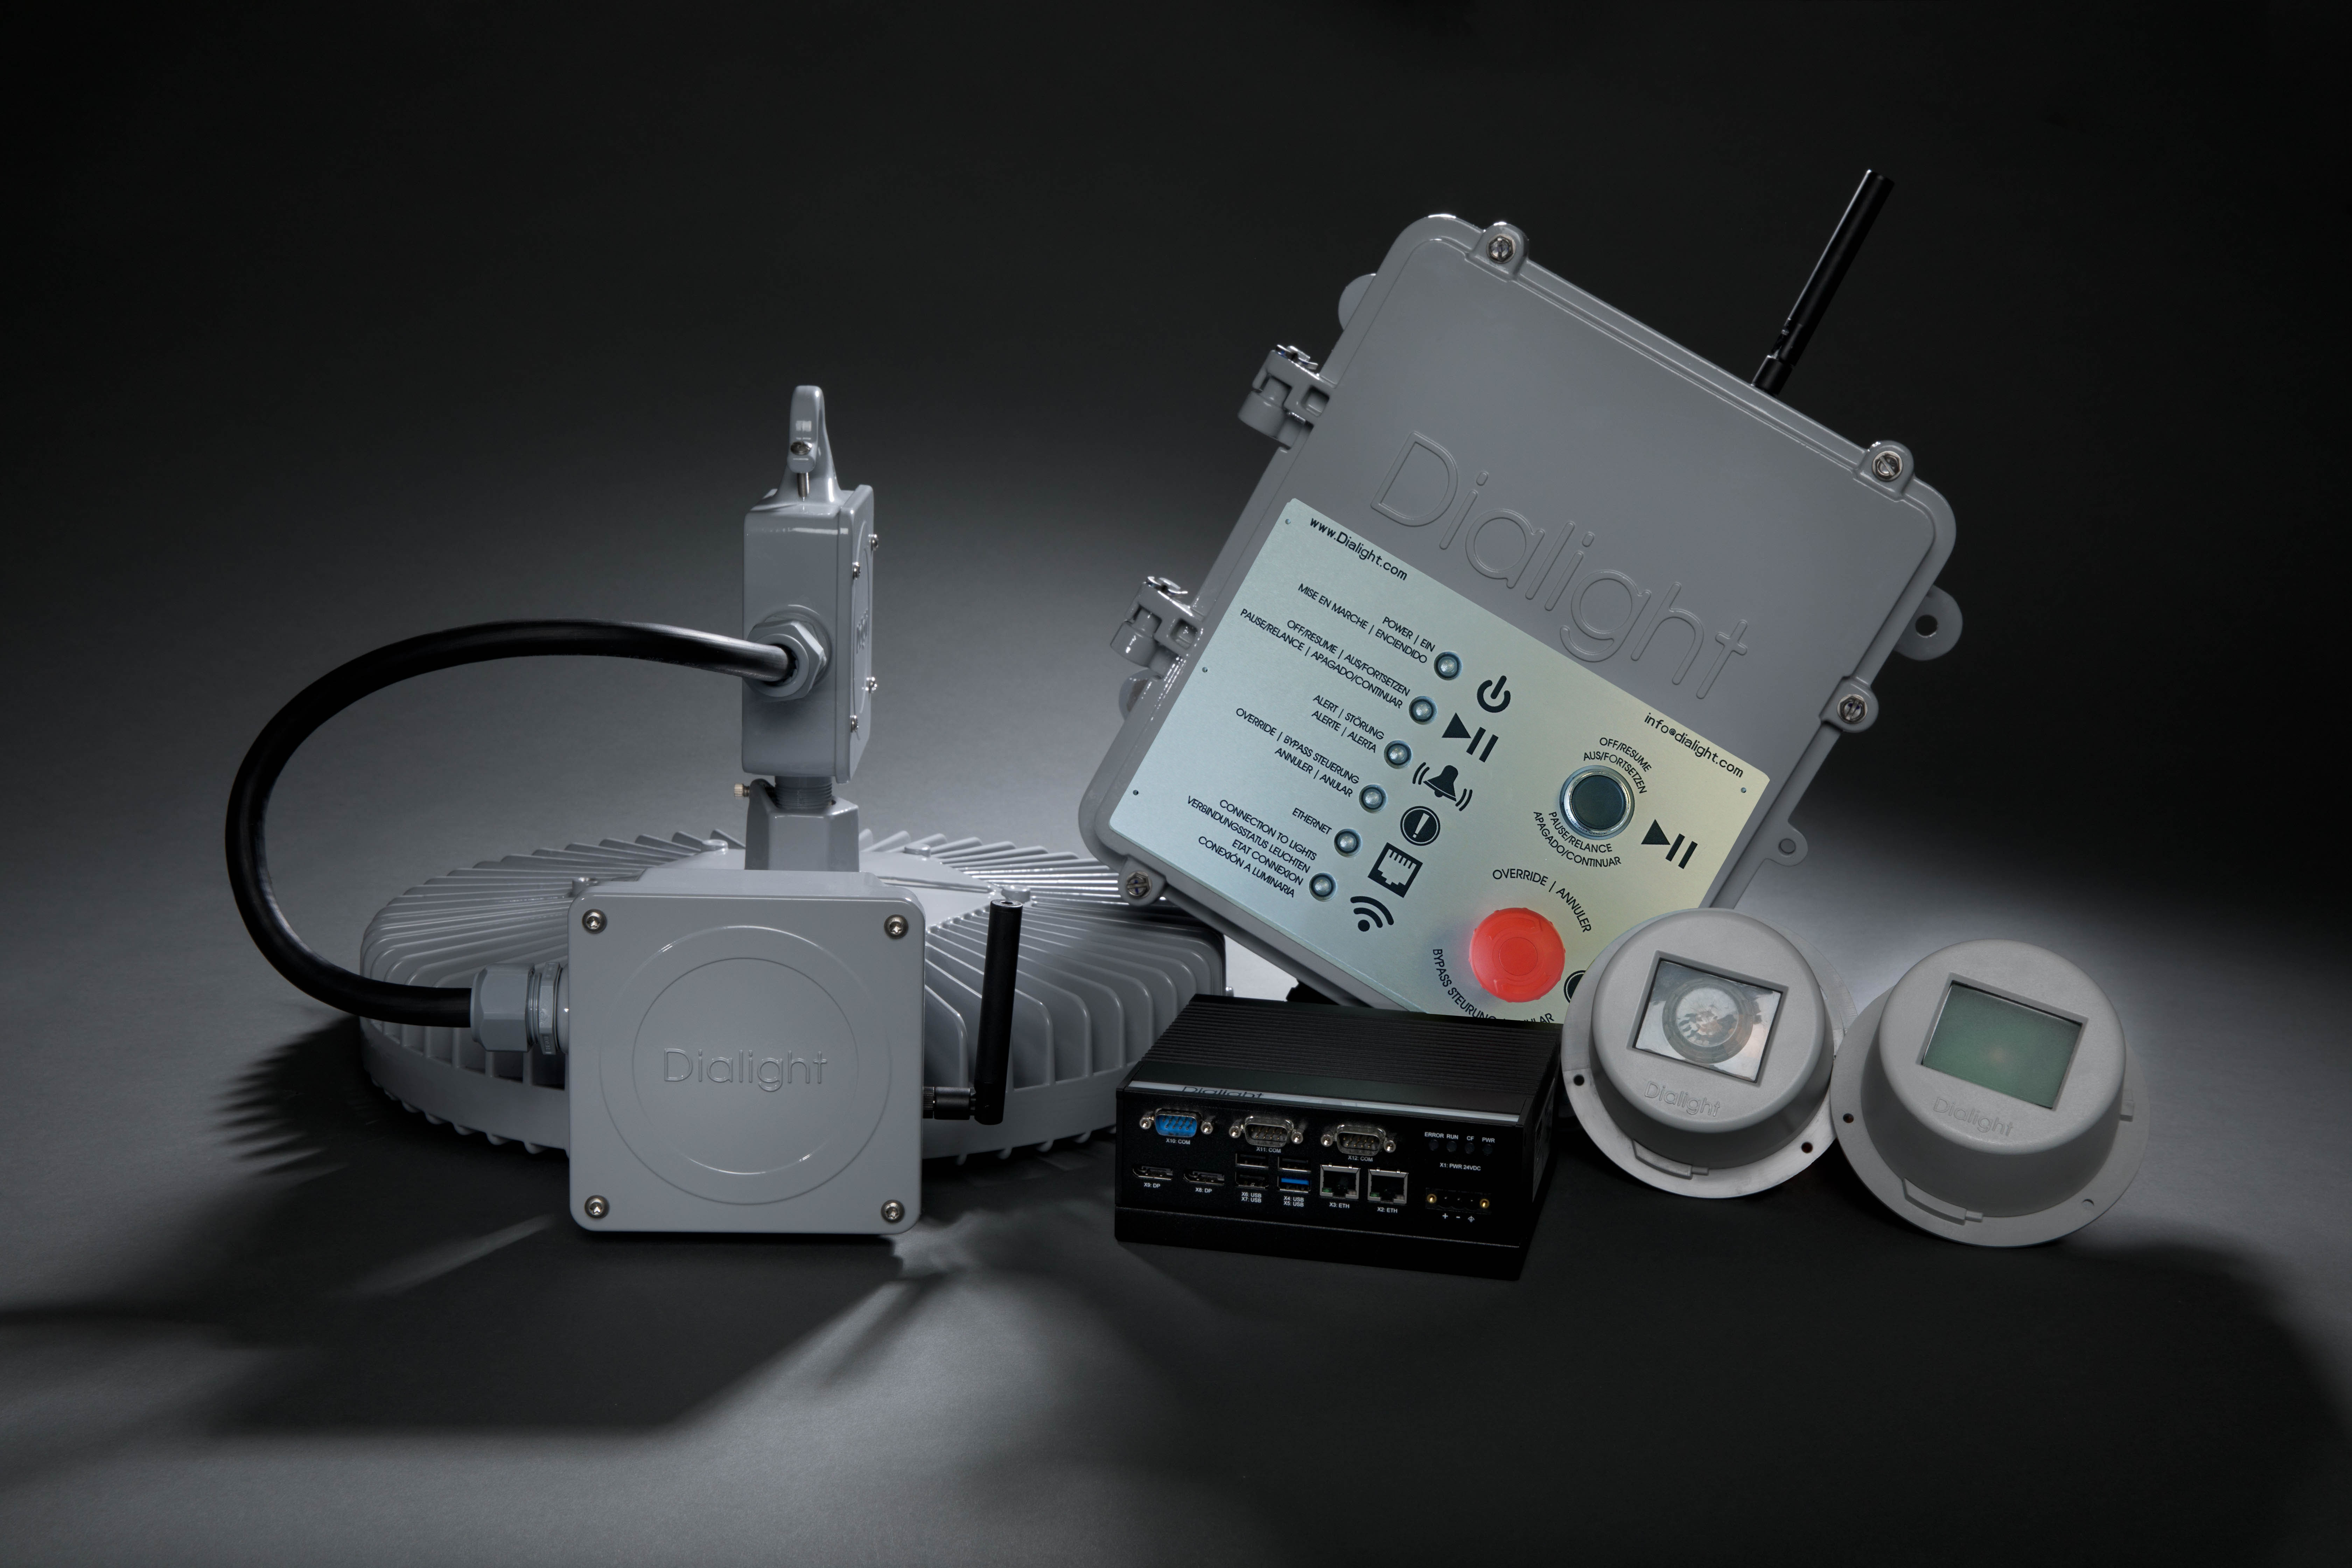 Dialight IntelliLED Wireless Controls with Vigilant High Bay and sensors.